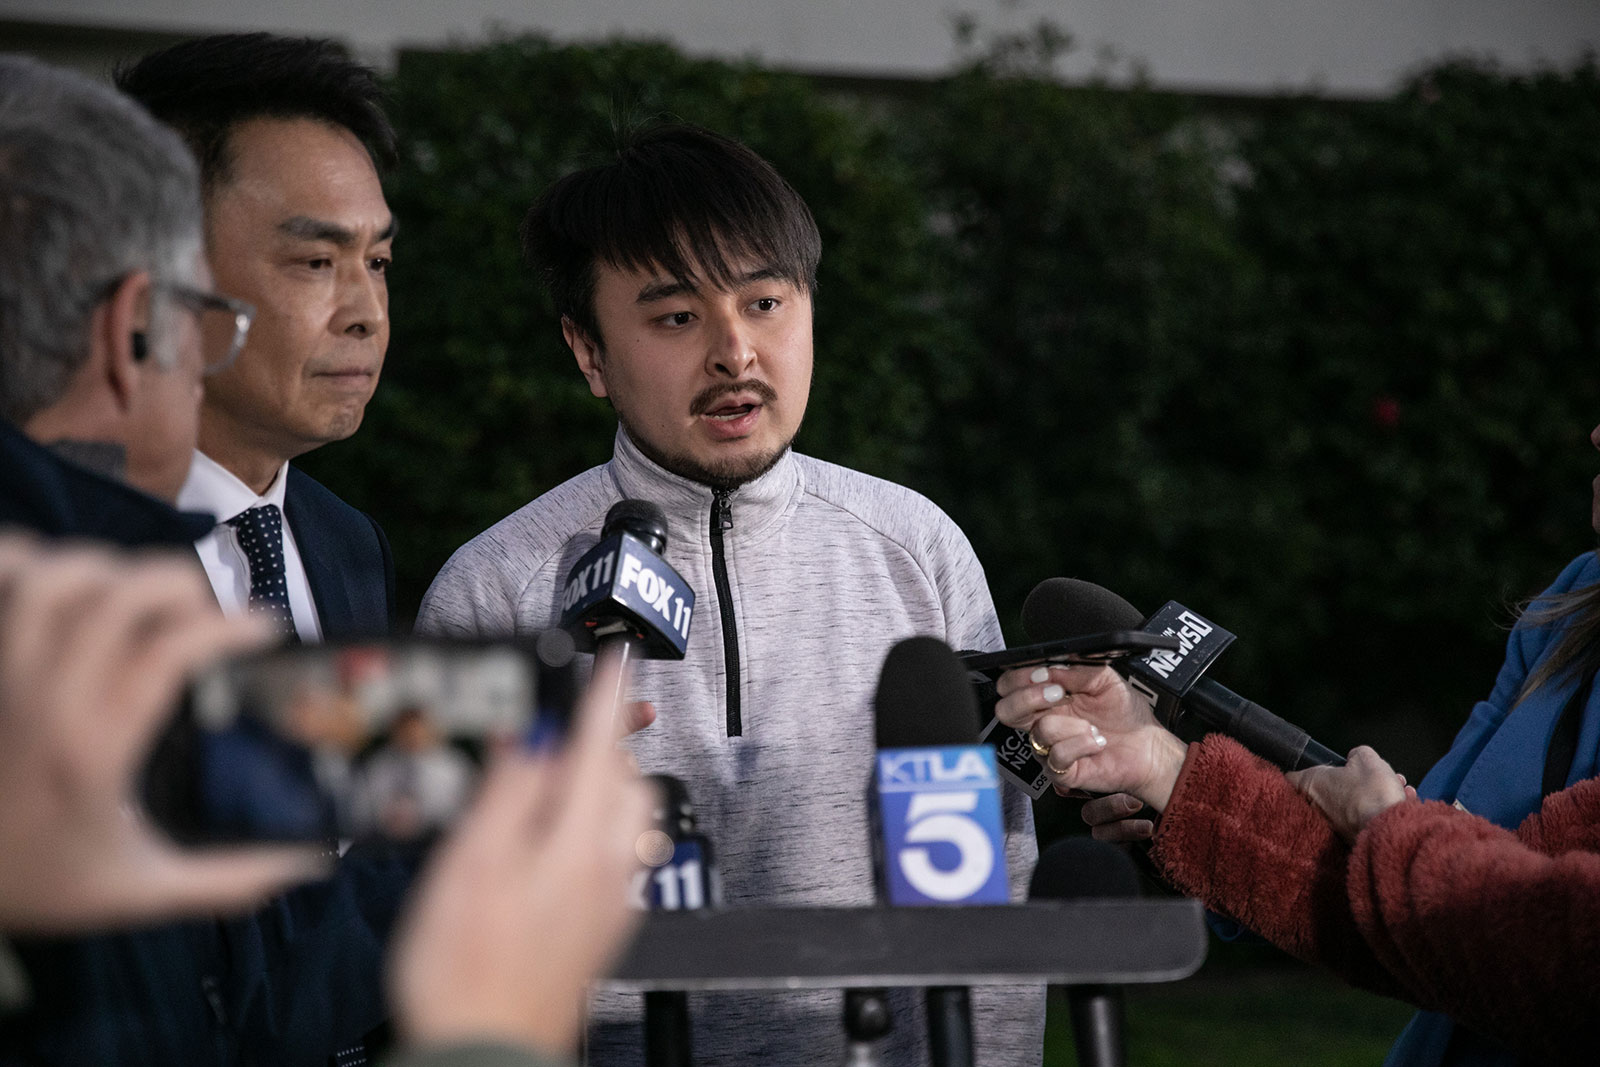 Brandon Tsay, who encountered an armed man in the lobby of Lai Lai Ballroom & Studio in Alhambra, California, speaks to the media Monday. After opening fire inside the Star Ballroom Dance Studio in Monterey Park, the gunman went to a second dance hall in Alhambra, officials said.